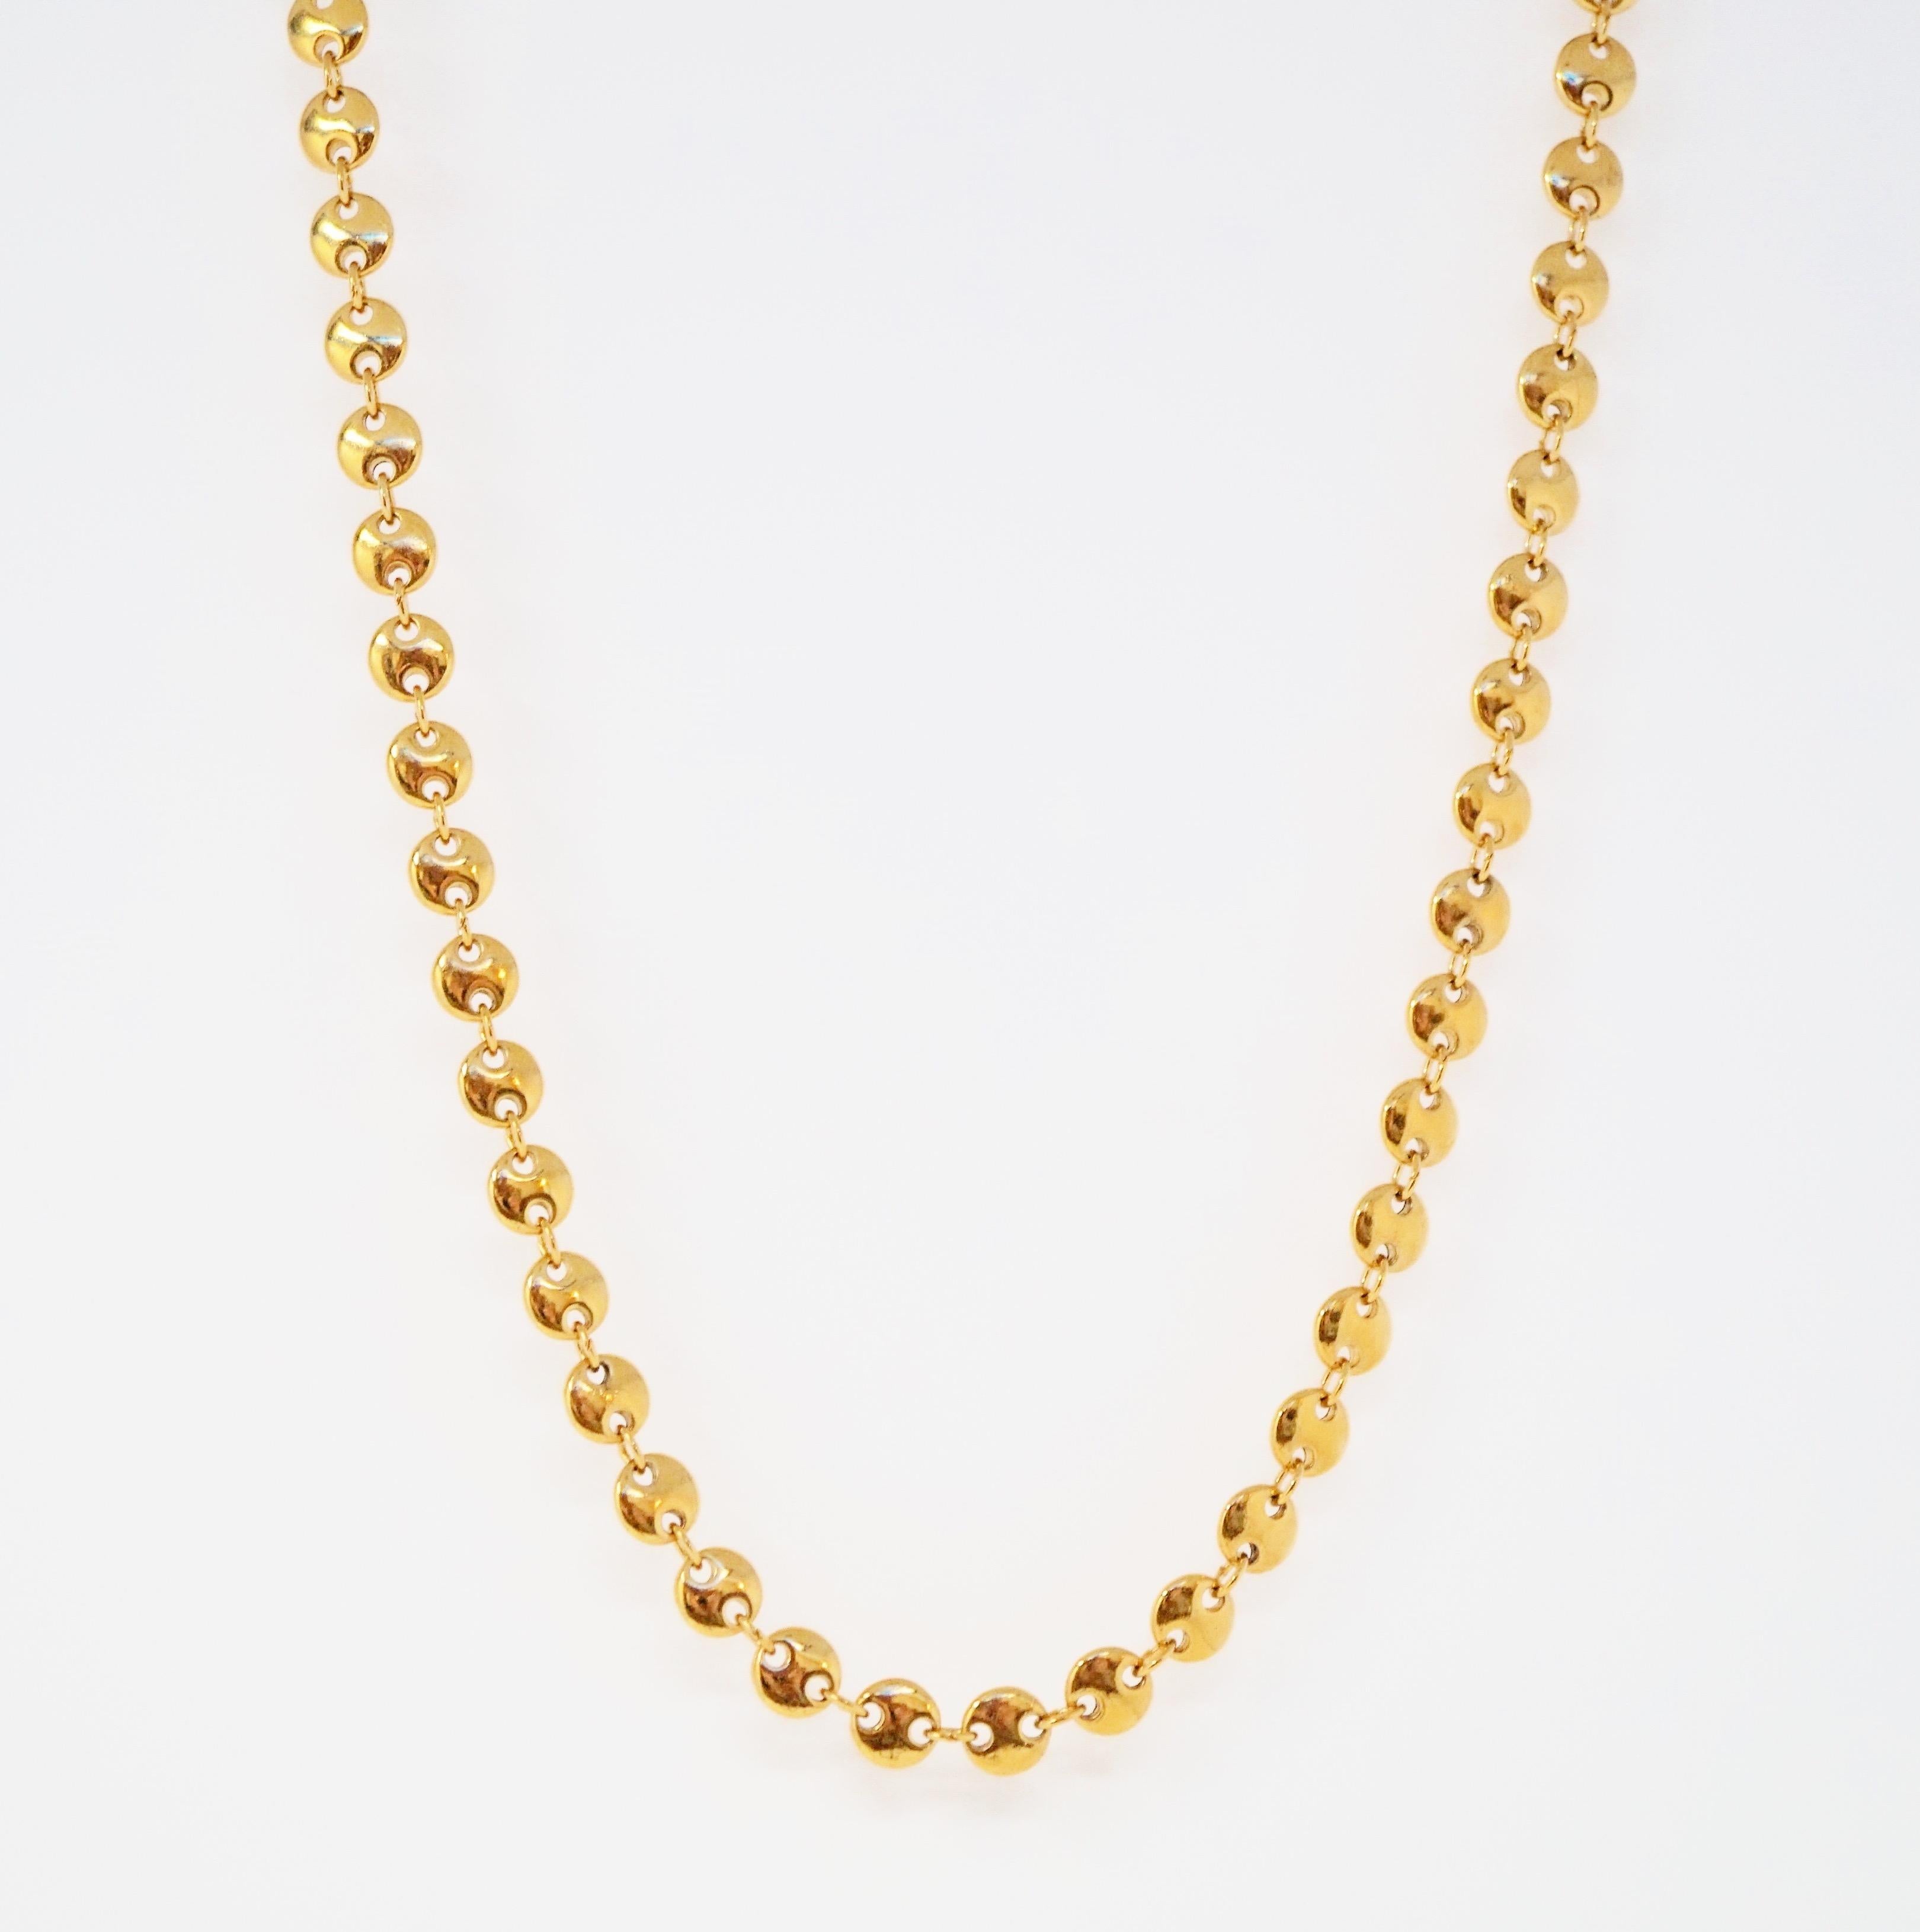 Stunningly beautiful gold-tone coin disc necklace by Trifari, circa 1955. Trifari is a highly collected costume jewelry brand, noted for it's high quality of construction and intricate details. This piece has a gold tone 